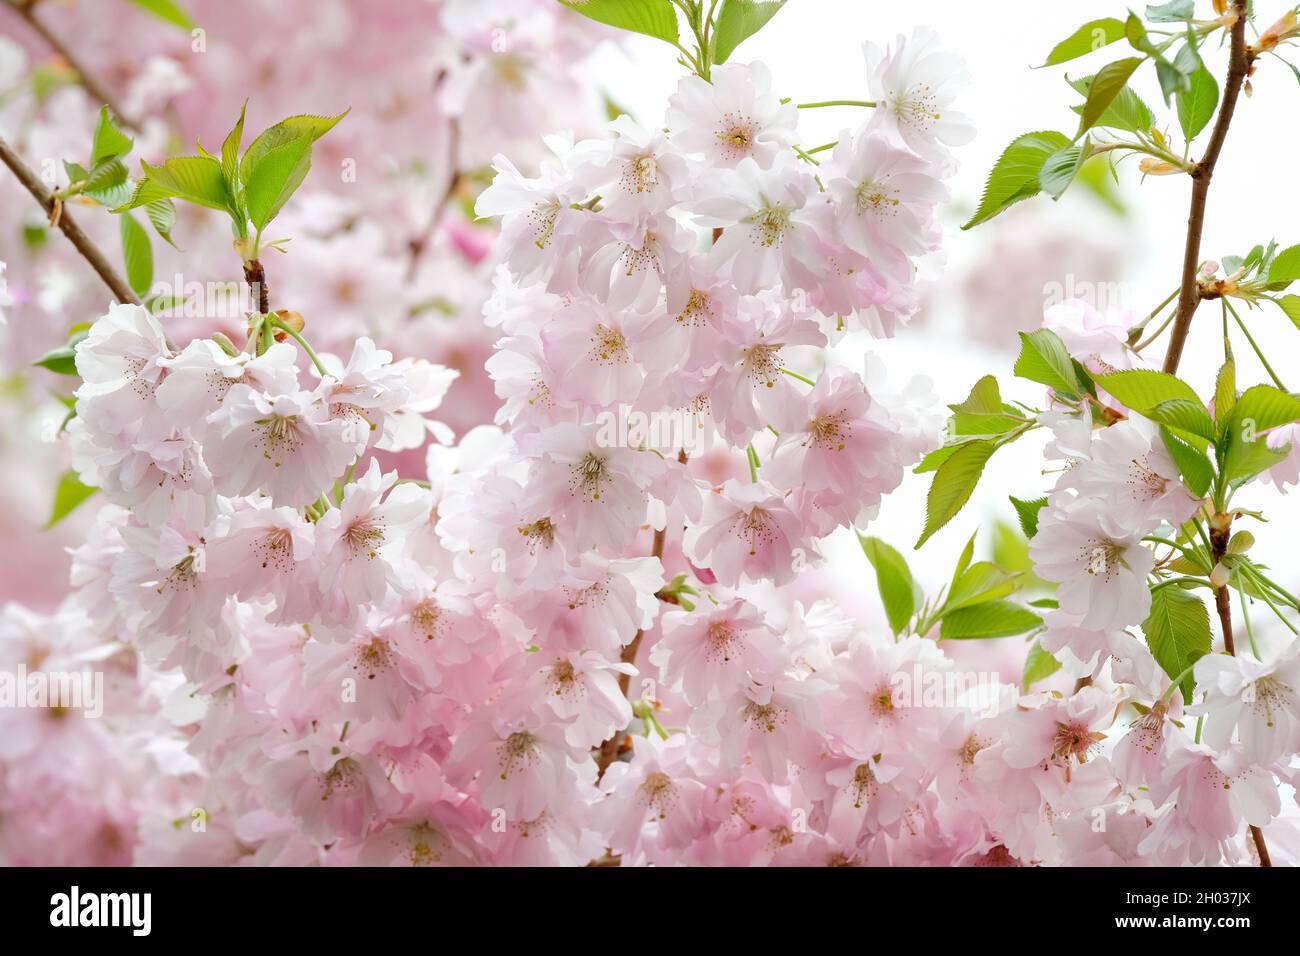 Prunus ‘Accolade’ (Ornamental cherry ‘Accolade’, Flowering Cherry ‘Accolade’. Pale pink flowers in late spring/early summer Stock Photo